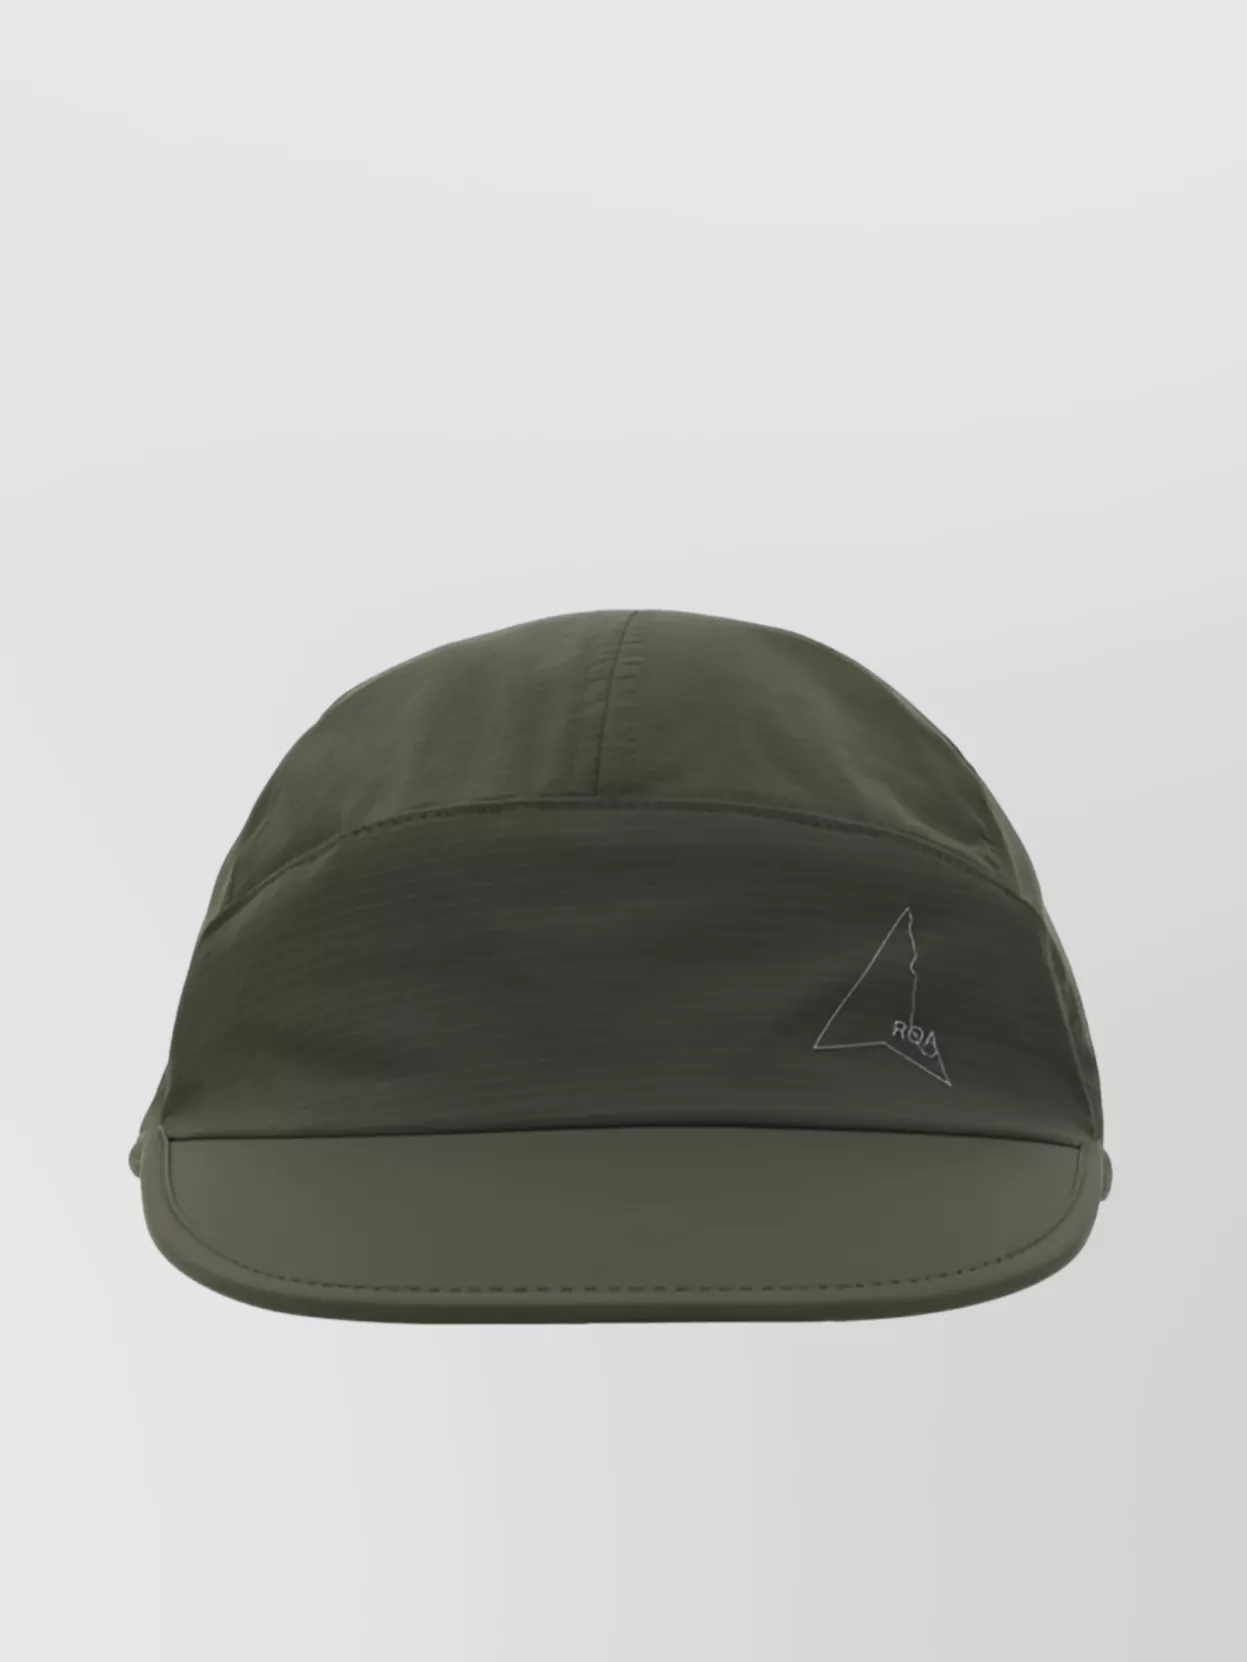 Shop Roa Cap With Curved Brim And Ventilation Eyelets